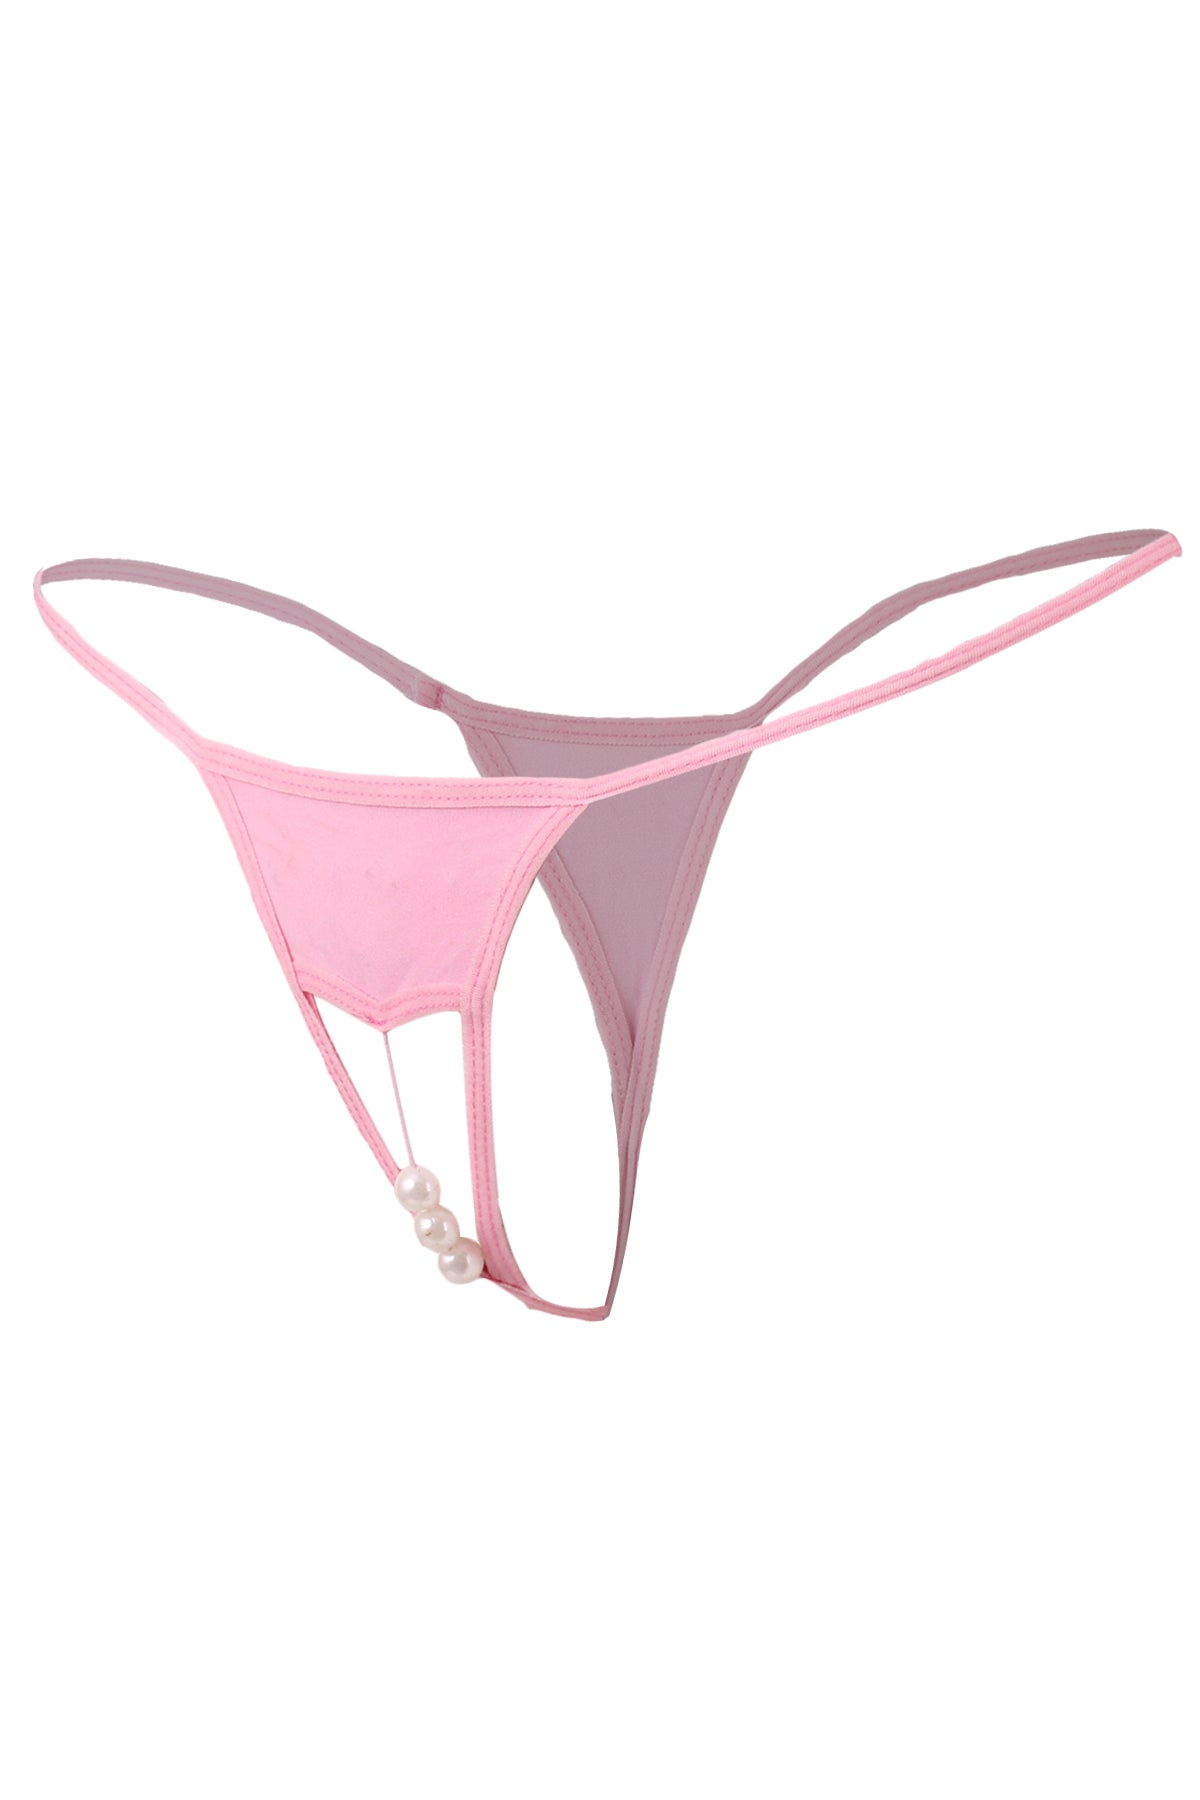 Kaamastra Womens Sexy Open Crotch Pearl Thong Pink